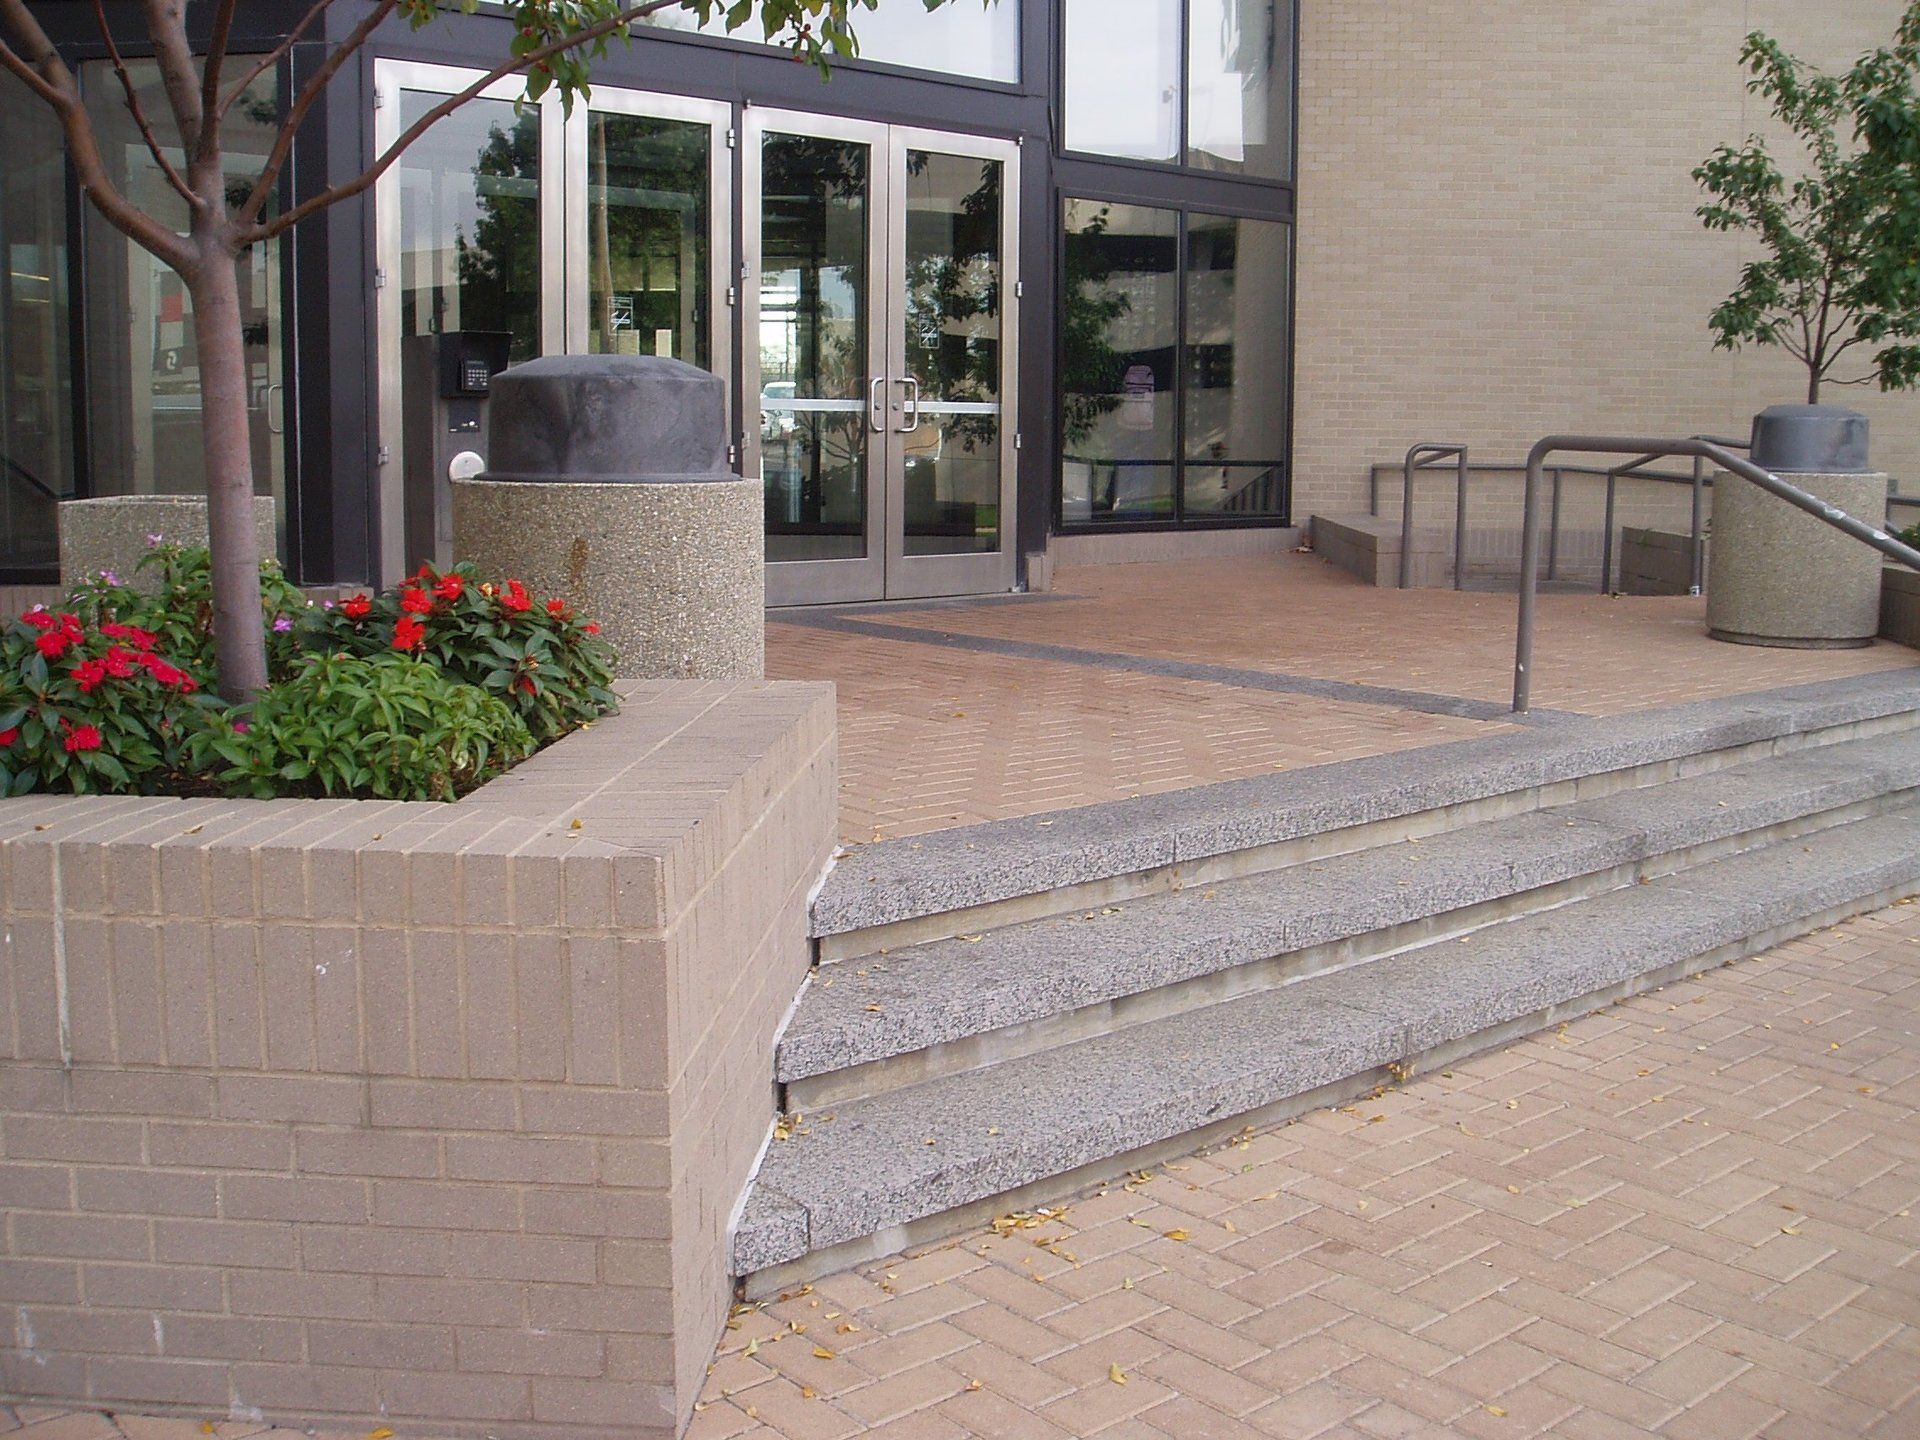 Sinclair Community College front lobby